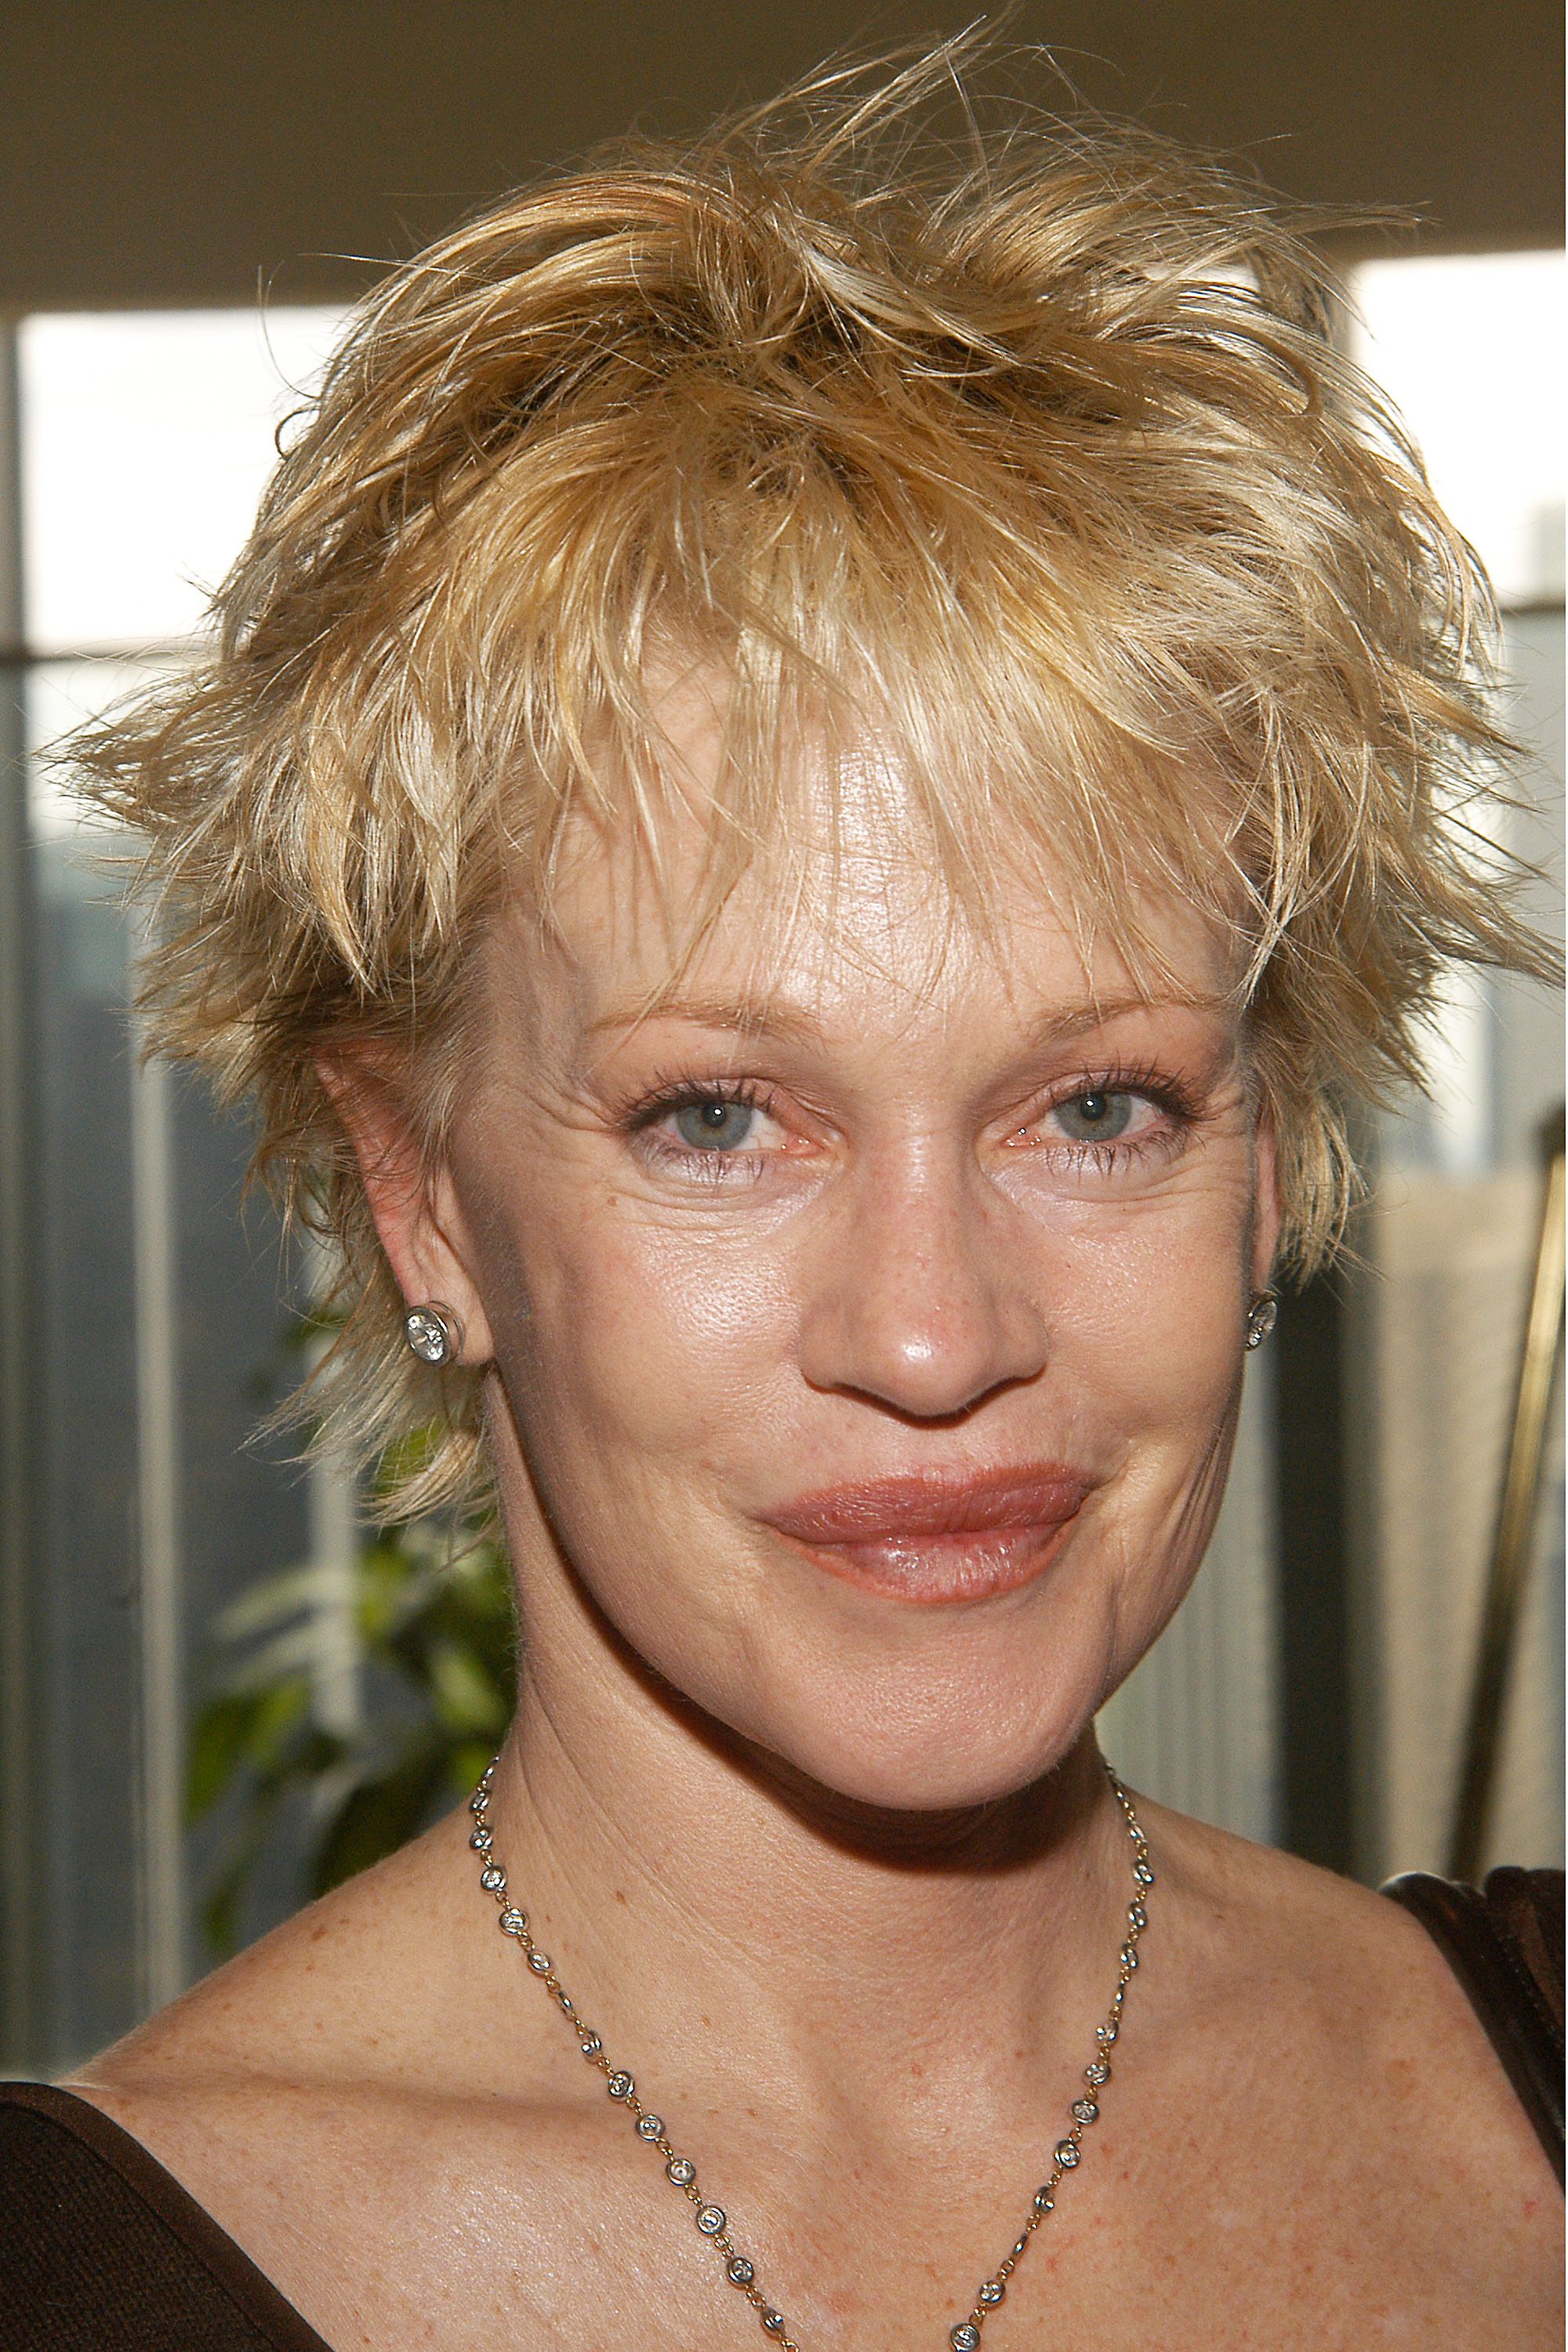 Melanie Griffith appears at the Tony Awards Nominee Luncheon in New York City on May 14, 2003. | Source: Getty Images